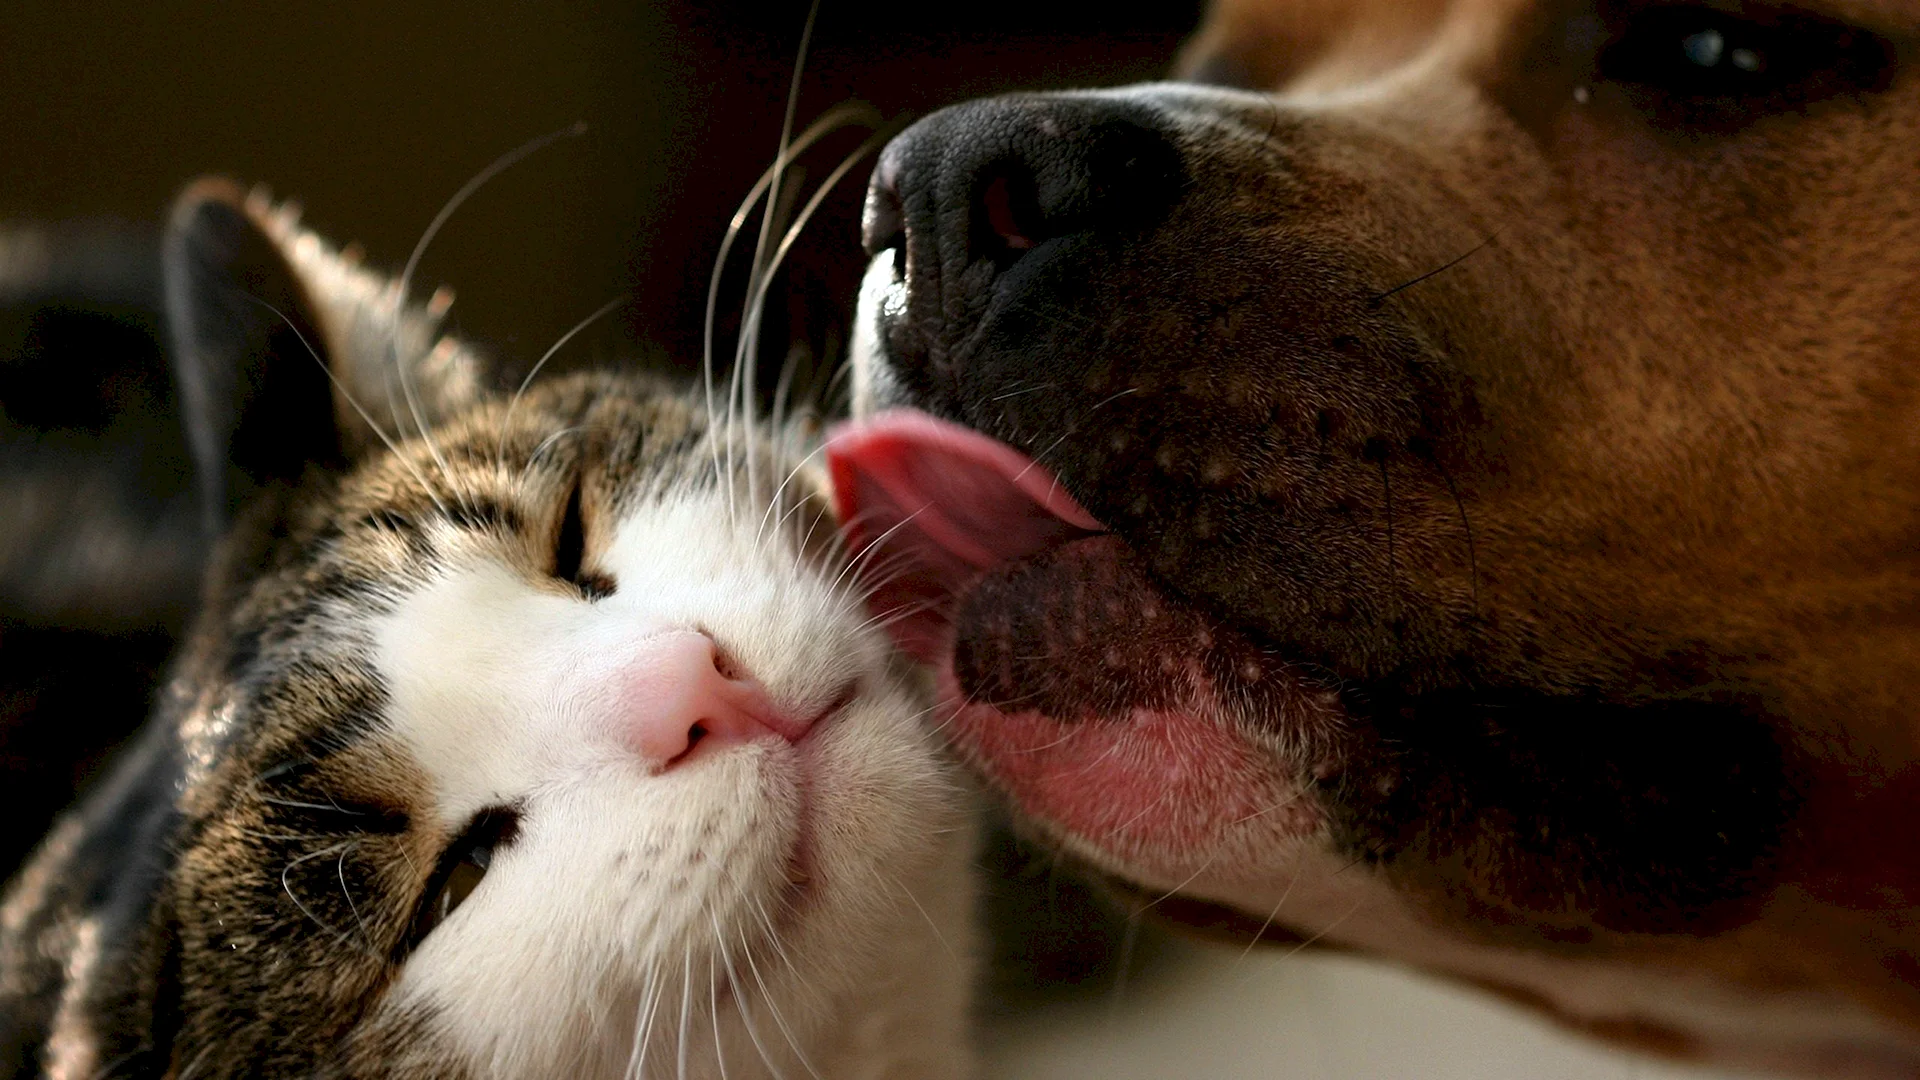 Dog And Cat Wallpaper